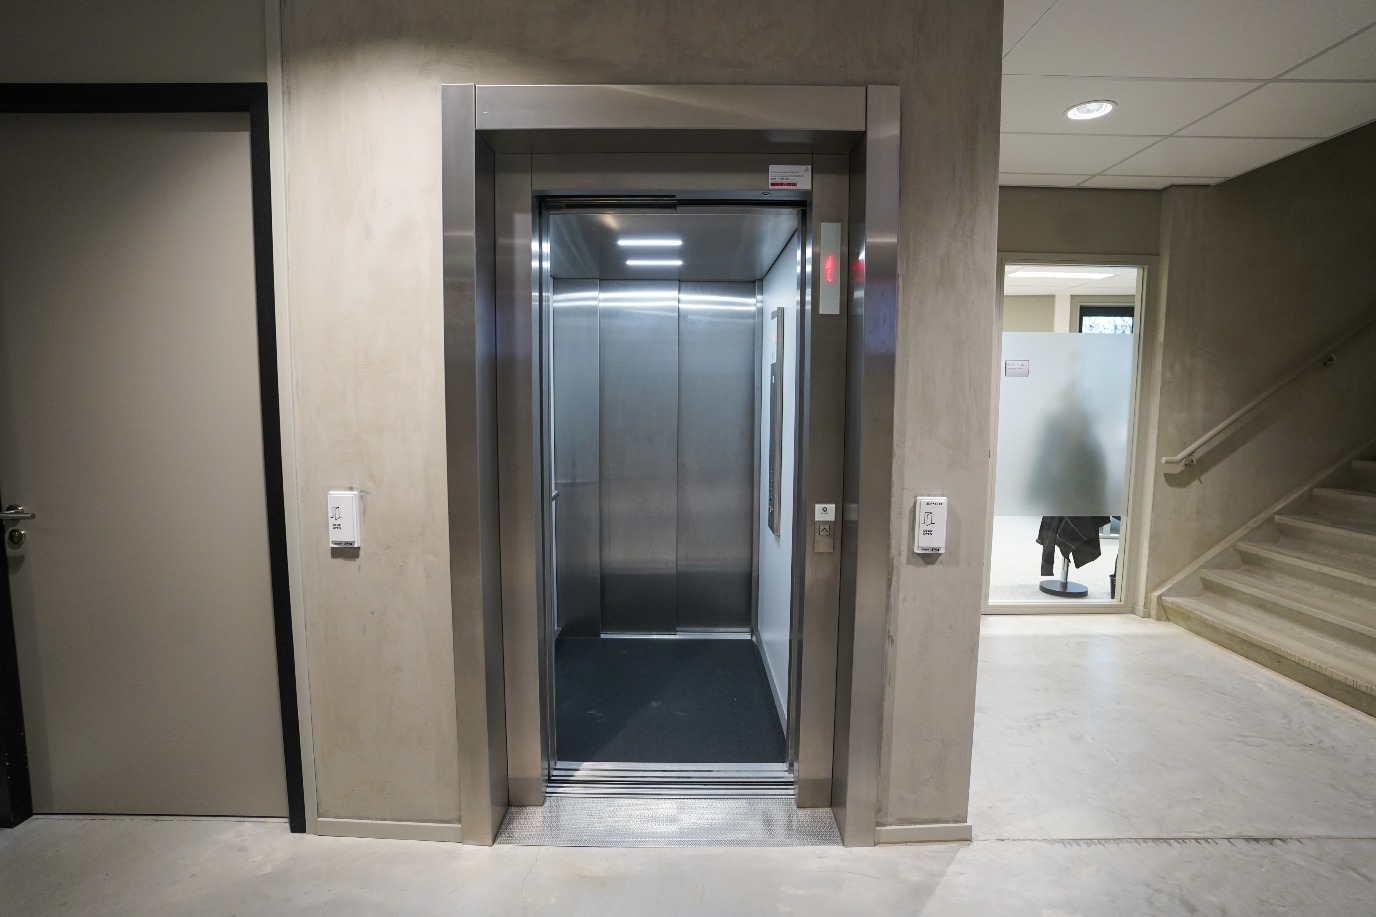 Elevator on site, from college entrance after reception to left